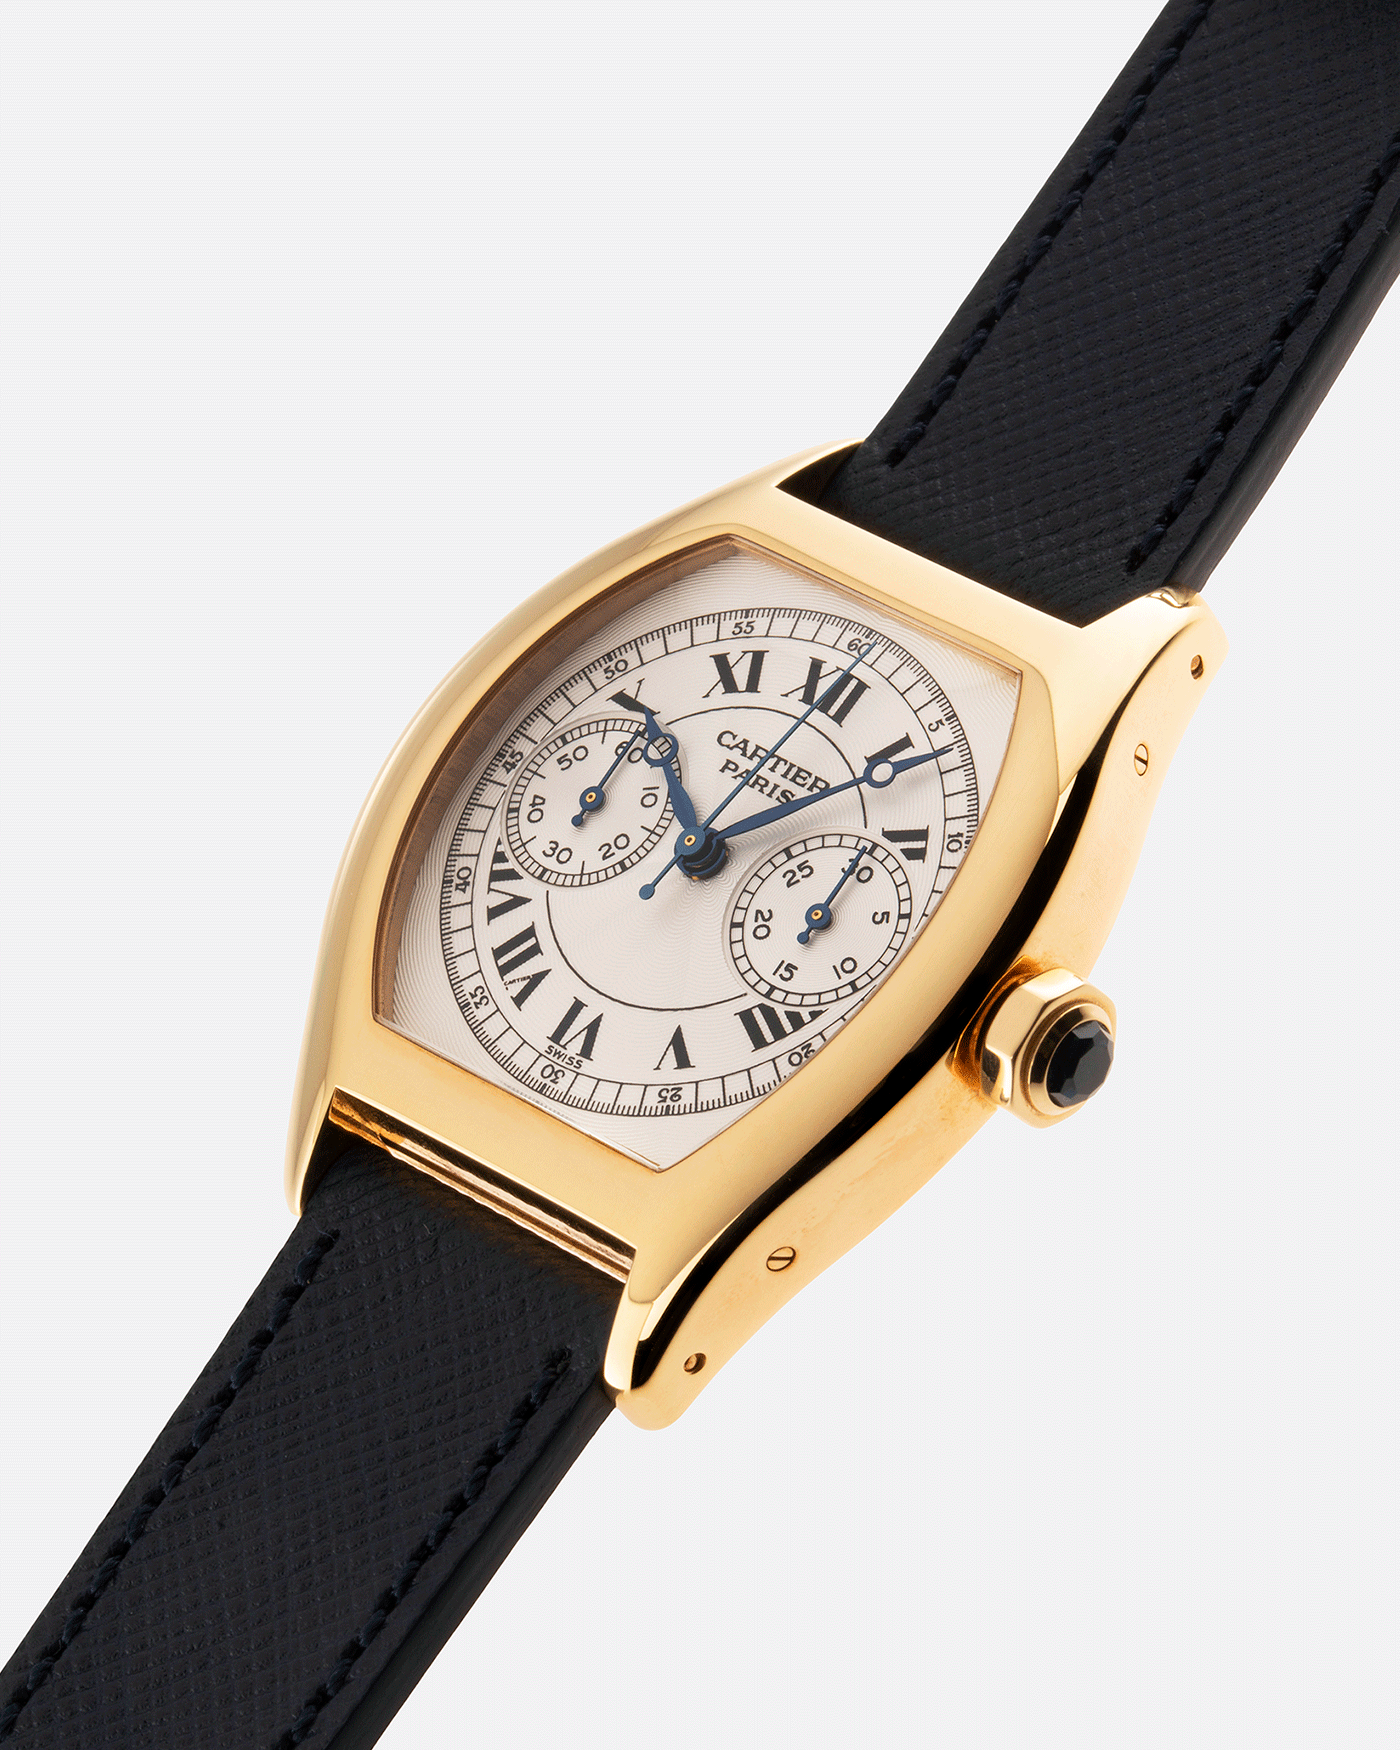 Brand: Cartier Year: 2000’s Model: CPCP Collection Prive Tortue Monopoussoir Reference: 2356E Material: 18k Yellow Gold Movement: THA Cal. 045MC Case Diameter: 43 x 35 mm Strap: Molequin Navy Blue Textured Calf with 18k Cartier Yellow Gold Deployant